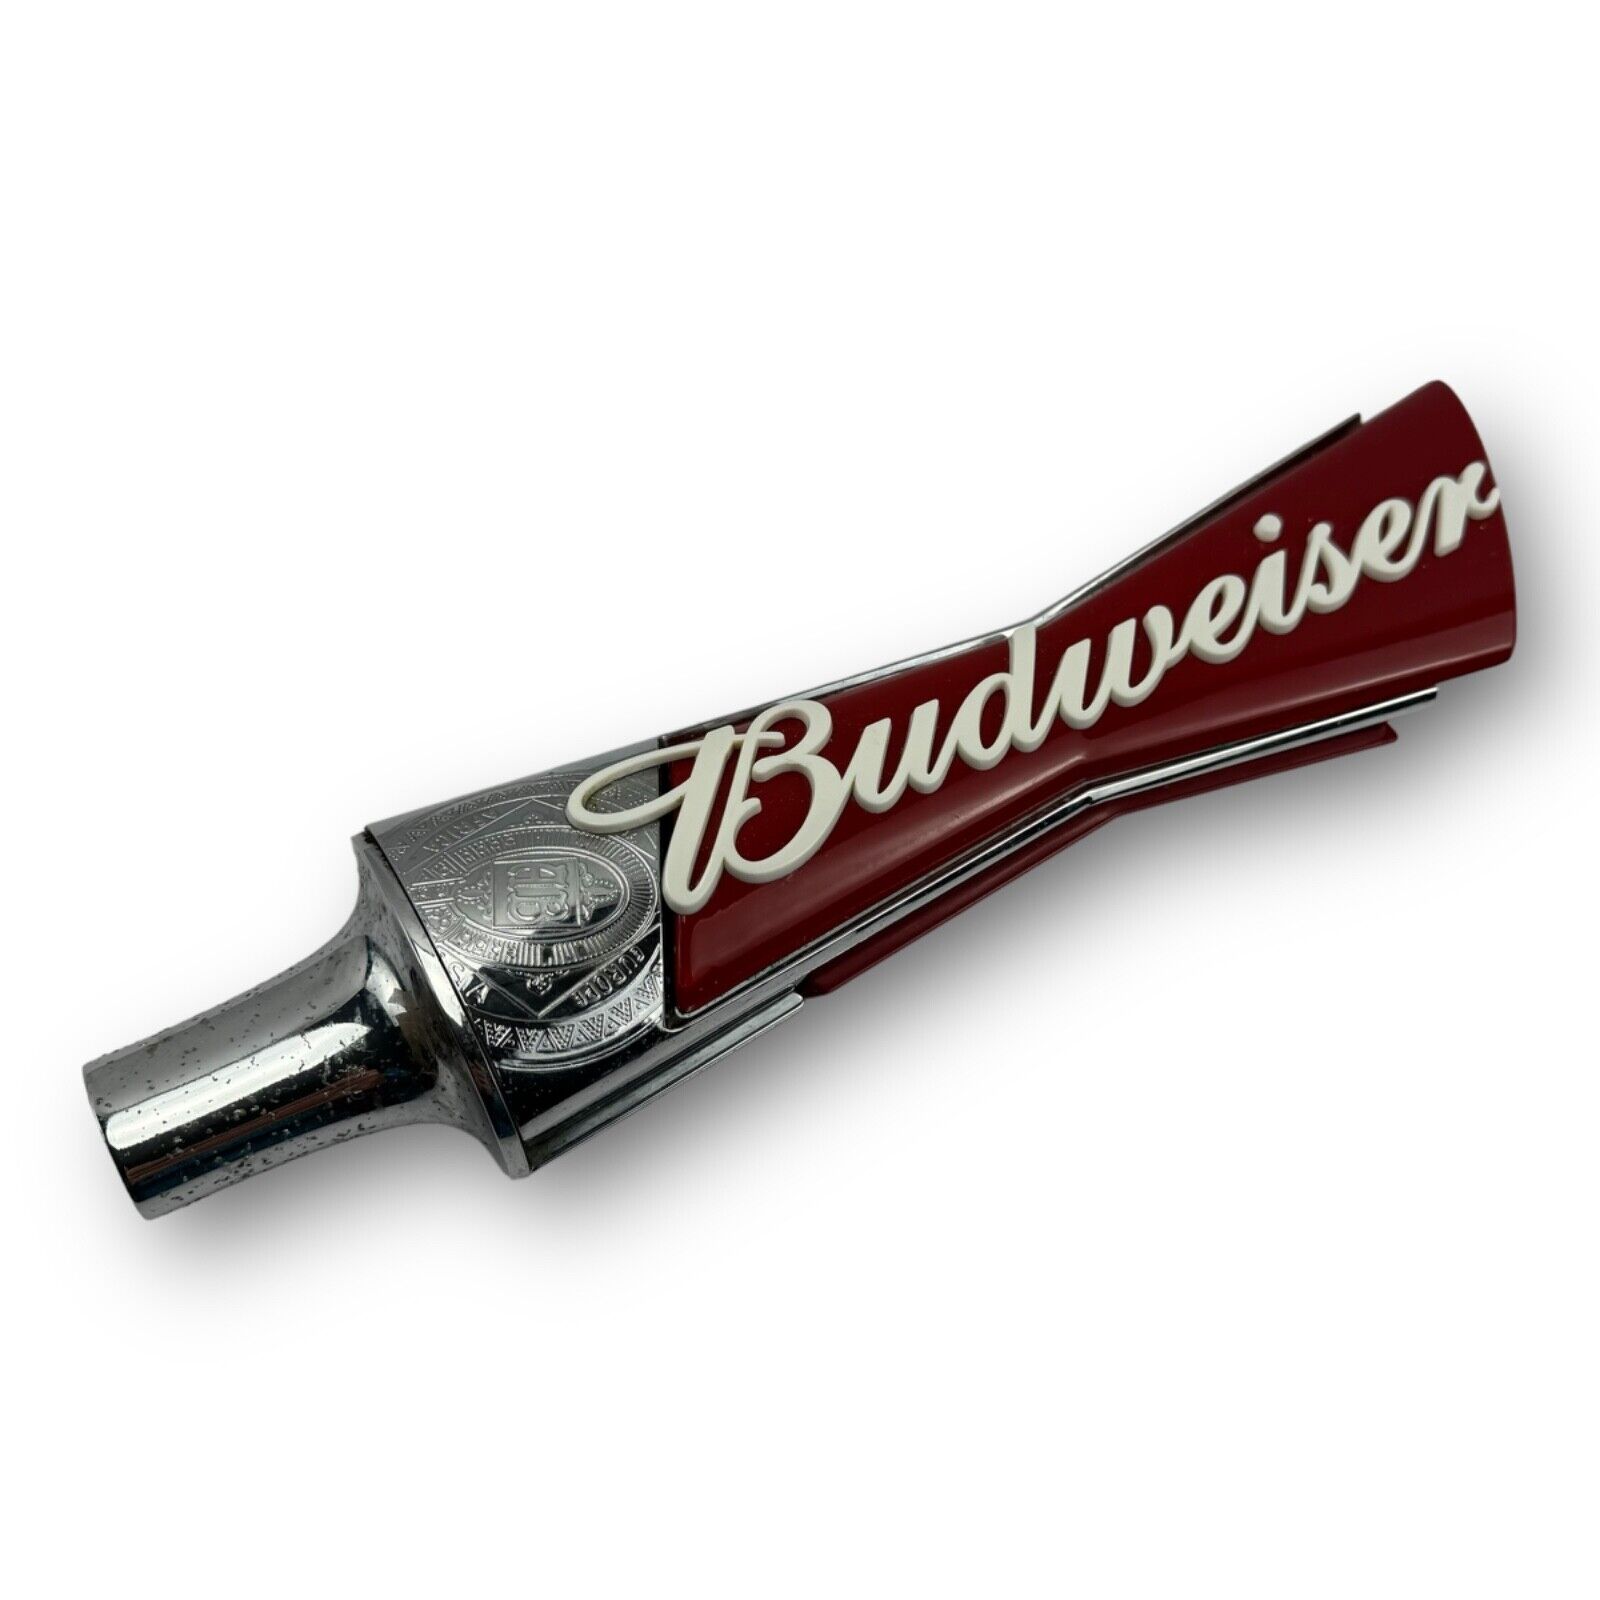 Budweiser Bowtie Logo Beer Tap Handle 12.75” Tall Bud - Red &Chrome Color